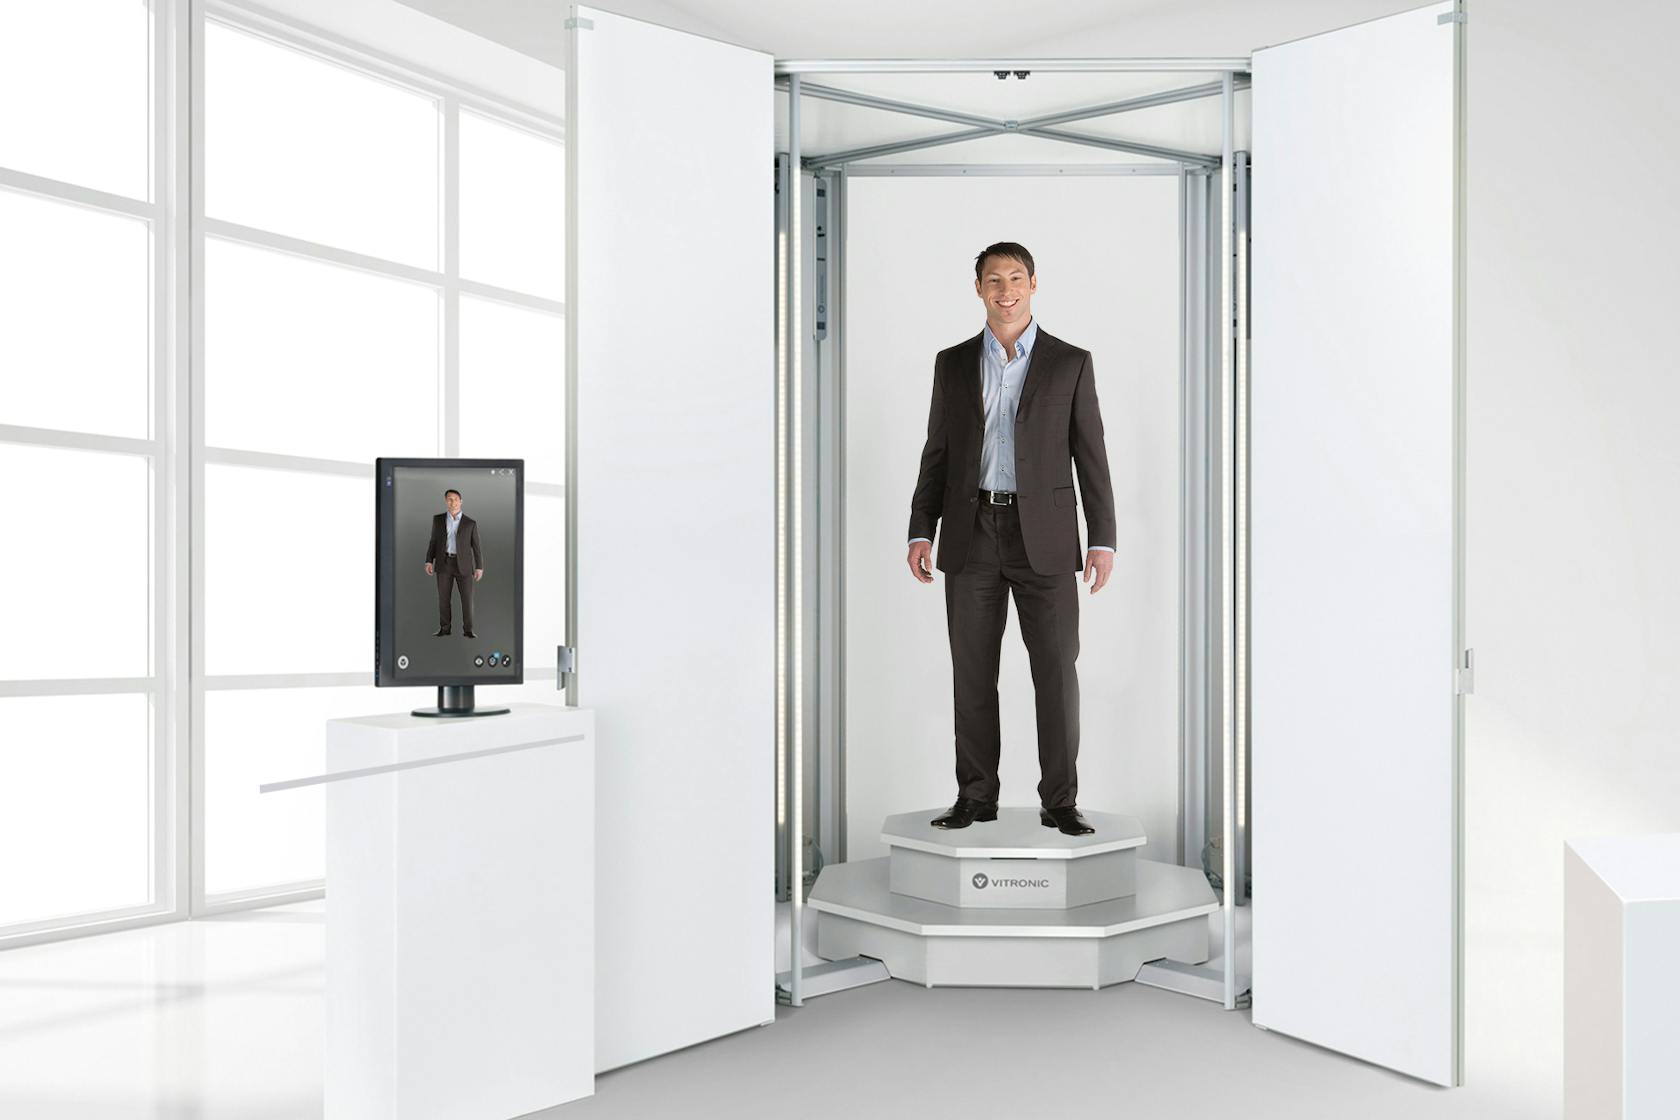 Made-to-measure clothing is produced digitally with the body scanner.	